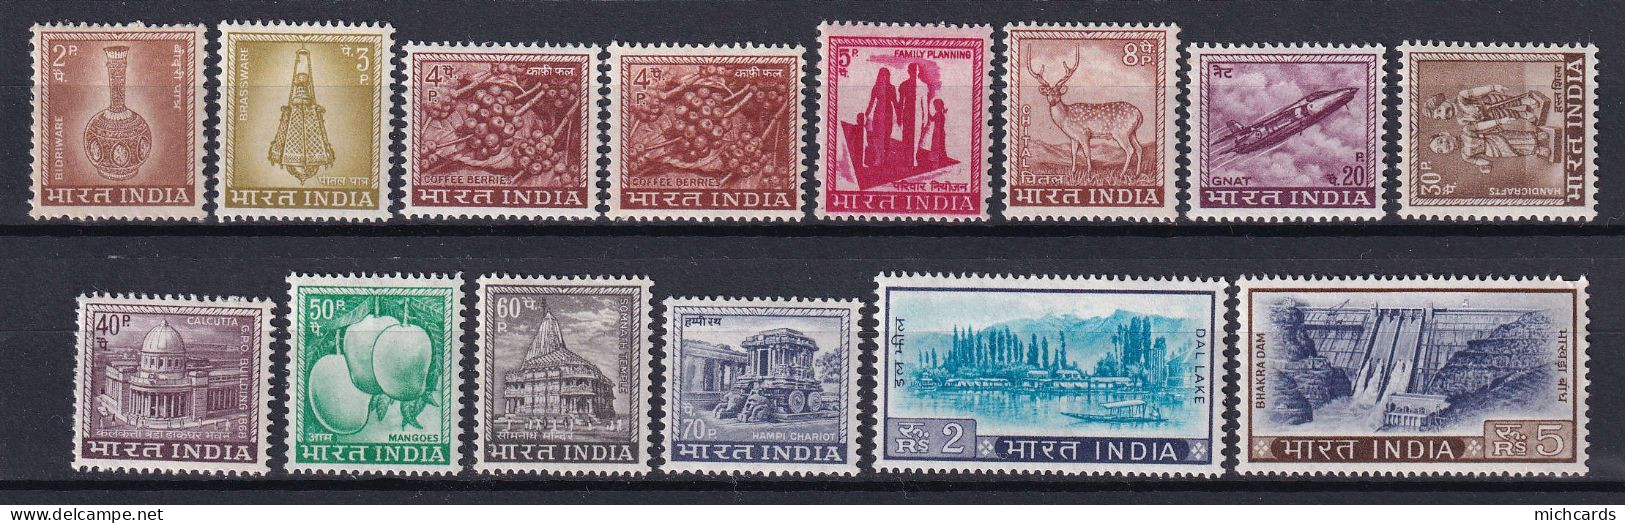 185 INDE 1967/69 - Yvert 222/32 - Serie Courante Definitive - Neuf ** (MNH) Sans Charniere - Neufs